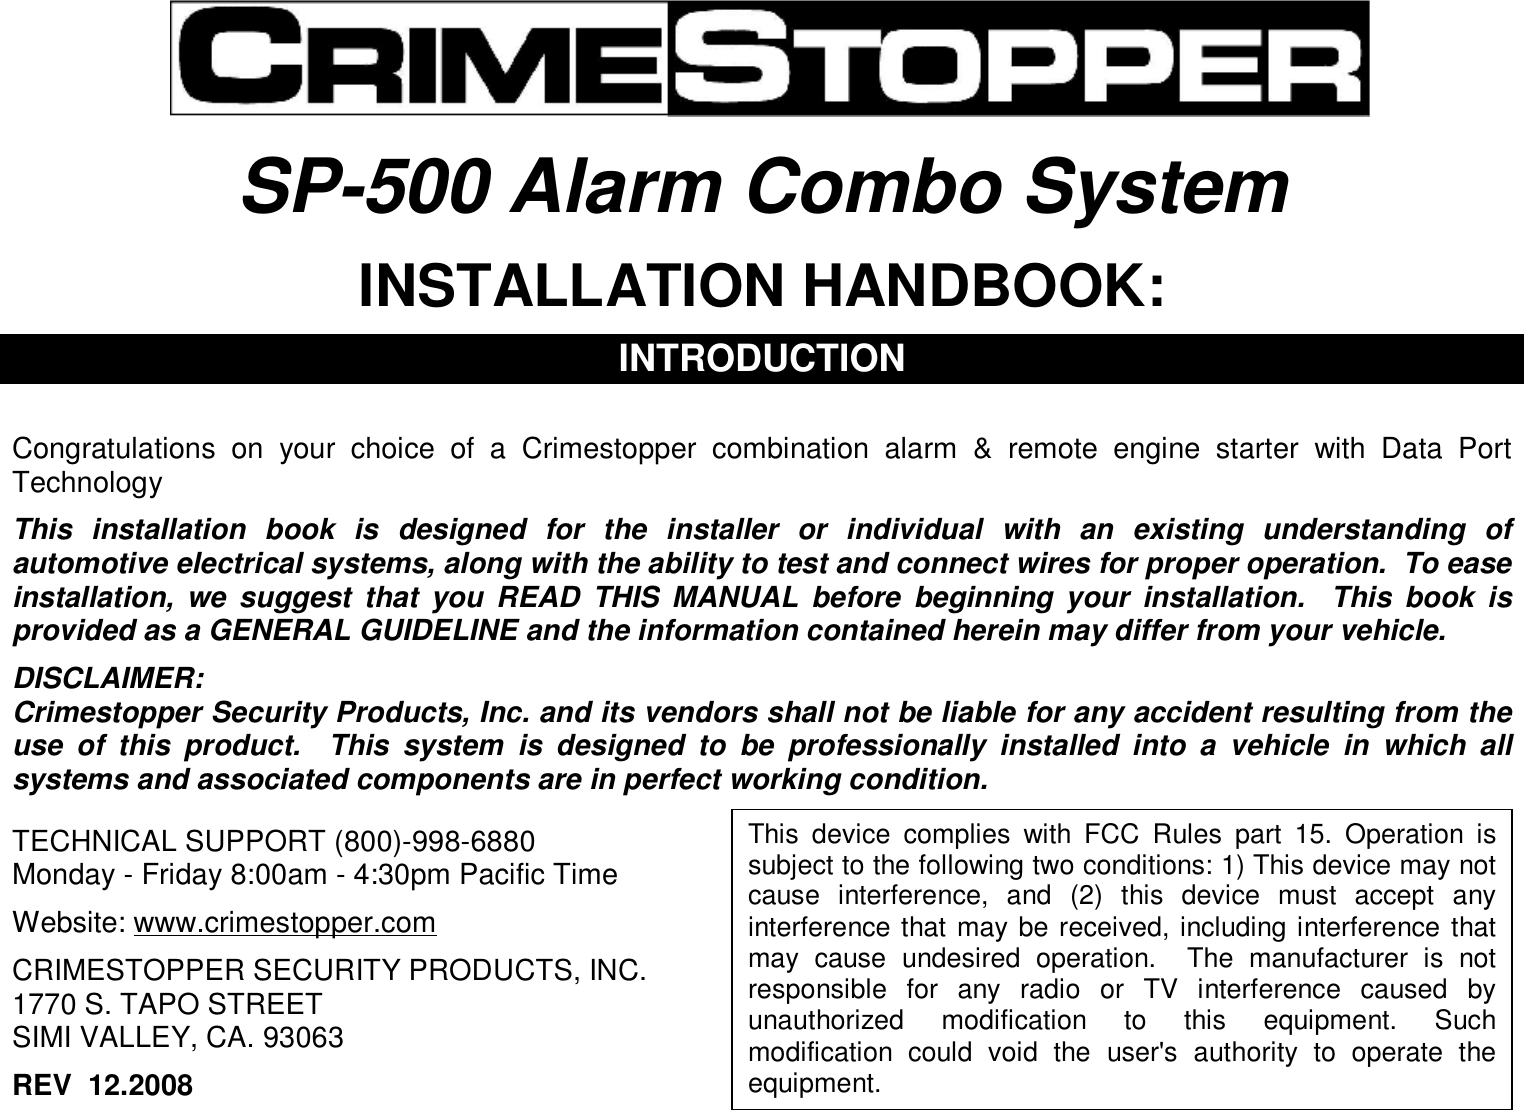   SP-500 Alarm Combo System  INSTALLATION HANDBOOK:  INTRODUCTION   Congratulations on your choice of a Crimestopper combination alarm &amp; remote engine starter with Data Port Technology  This installation book is designed for the installer or individual with an existing understanding of automotive electrical systems, along with the ability to test and connect wires for proper operation.  To ease installation, we suggest that you READ THIS MANUAL before beginning your installation.  This book is provided as a GENERAL GUIDELINE and the information contained herein may differ from your vehicle.  DISCLAIMER: Crimestopper Security Products, Inc. and its vendors shall not be liable for any accident resulting from the use of this product.  This system is designed to be professionally installed into a vehicle in which all systems and associated components are in perfect working condition.   TECHNICAL SUPPORT (800)-998-6880 Monday - Friday 8:00am - 4:30pm Pacific Time  Website: www.crimestopper.com  CRIMESTOPPER SECURITY PRODUCTS, INC. 1770 S. TAPO STREET SIMI VALLEY, CA. 93063  REV  12.2008   This device complies with FCC Rules part 15. Operation is subject to the following two conditions: 1) This device may not cause interference, and (2) this device must accept any interference that may be received, including interference that may cause undesired operation.  The manufacturer is not responsible for any radio or TV interference caused by unauthorized modification to this equipment. Such modification could void the user&apos;s authority to operate the equipment. 